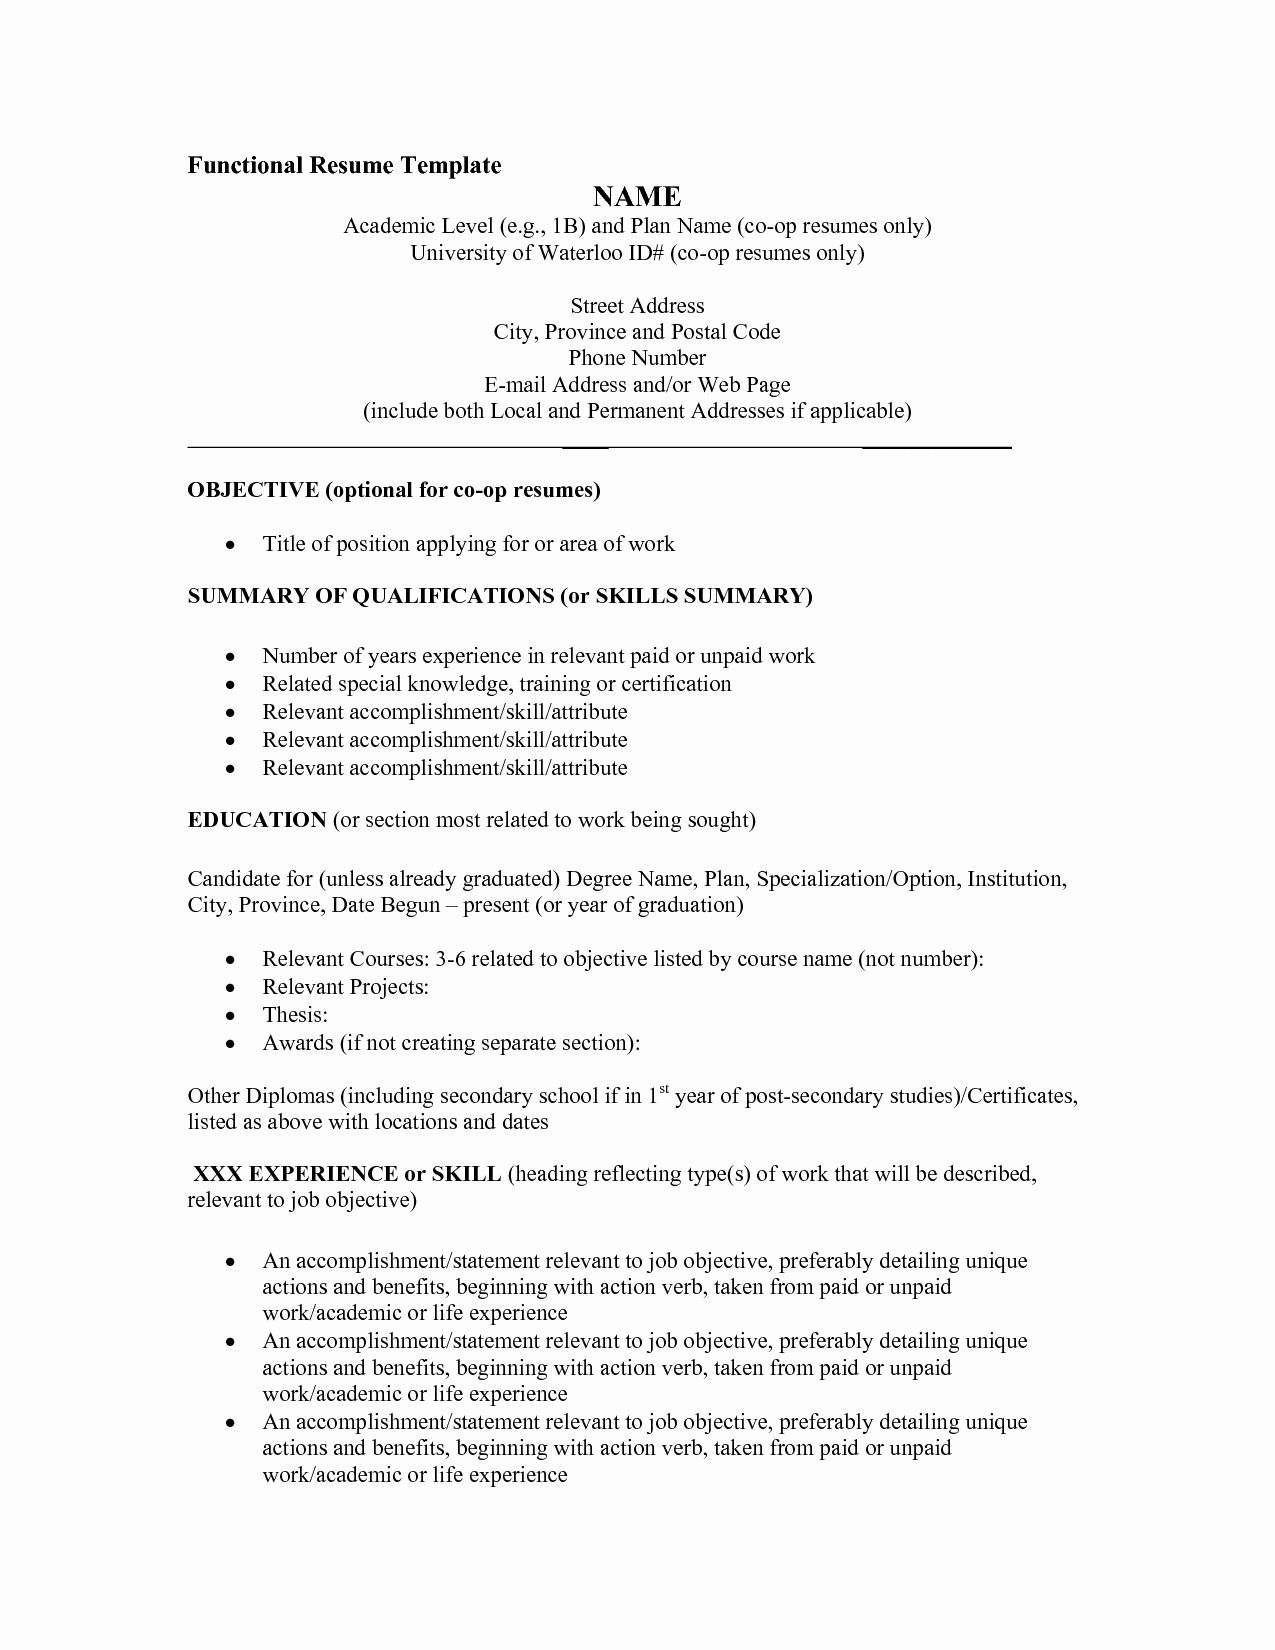 Free Functional Resume Templates Unique Resume Template ...